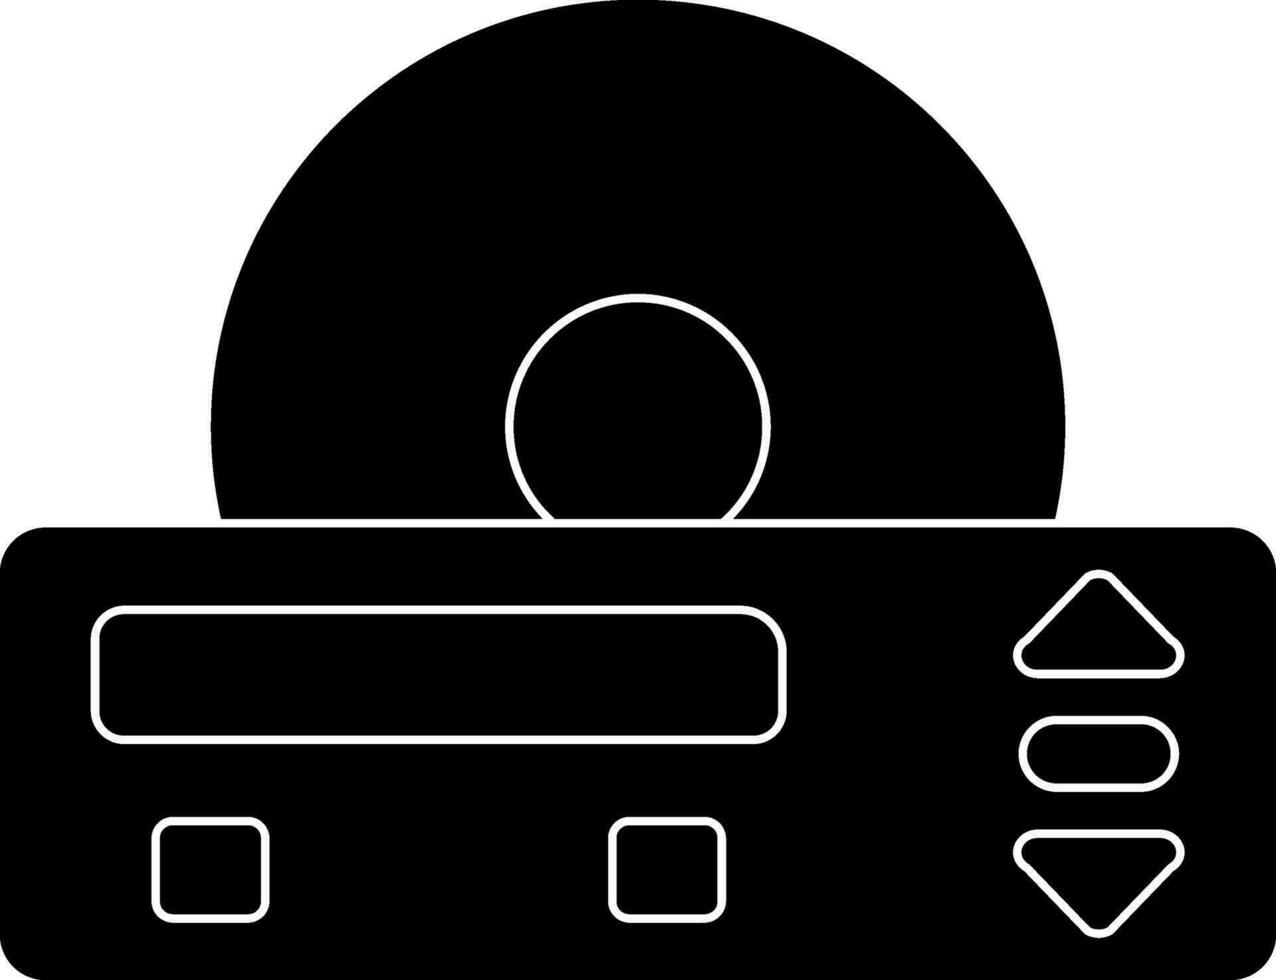 DVD Player Icon In Black And White Color. vector